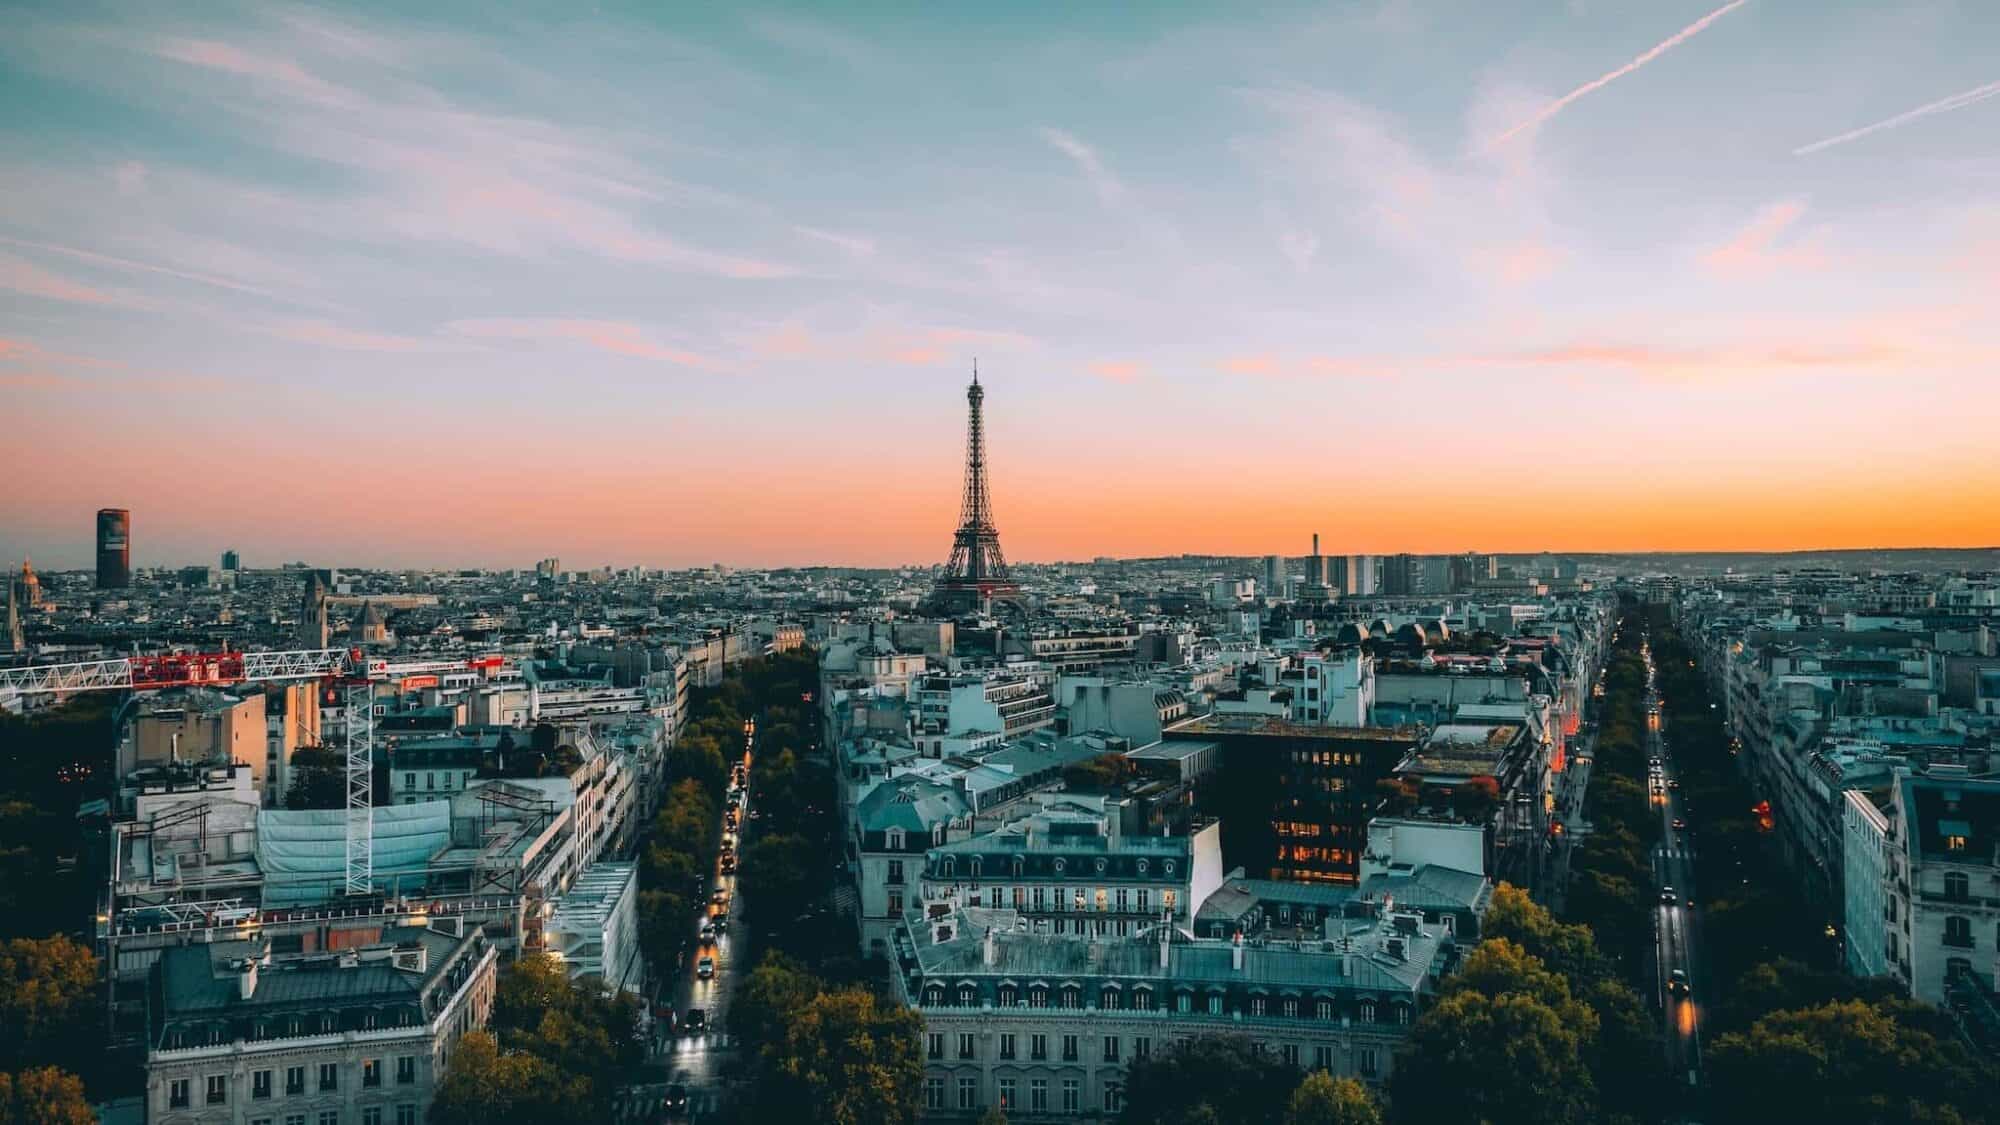 Paris Apartments for Sale: Eiffel Tower Views, Air Conditioning & More